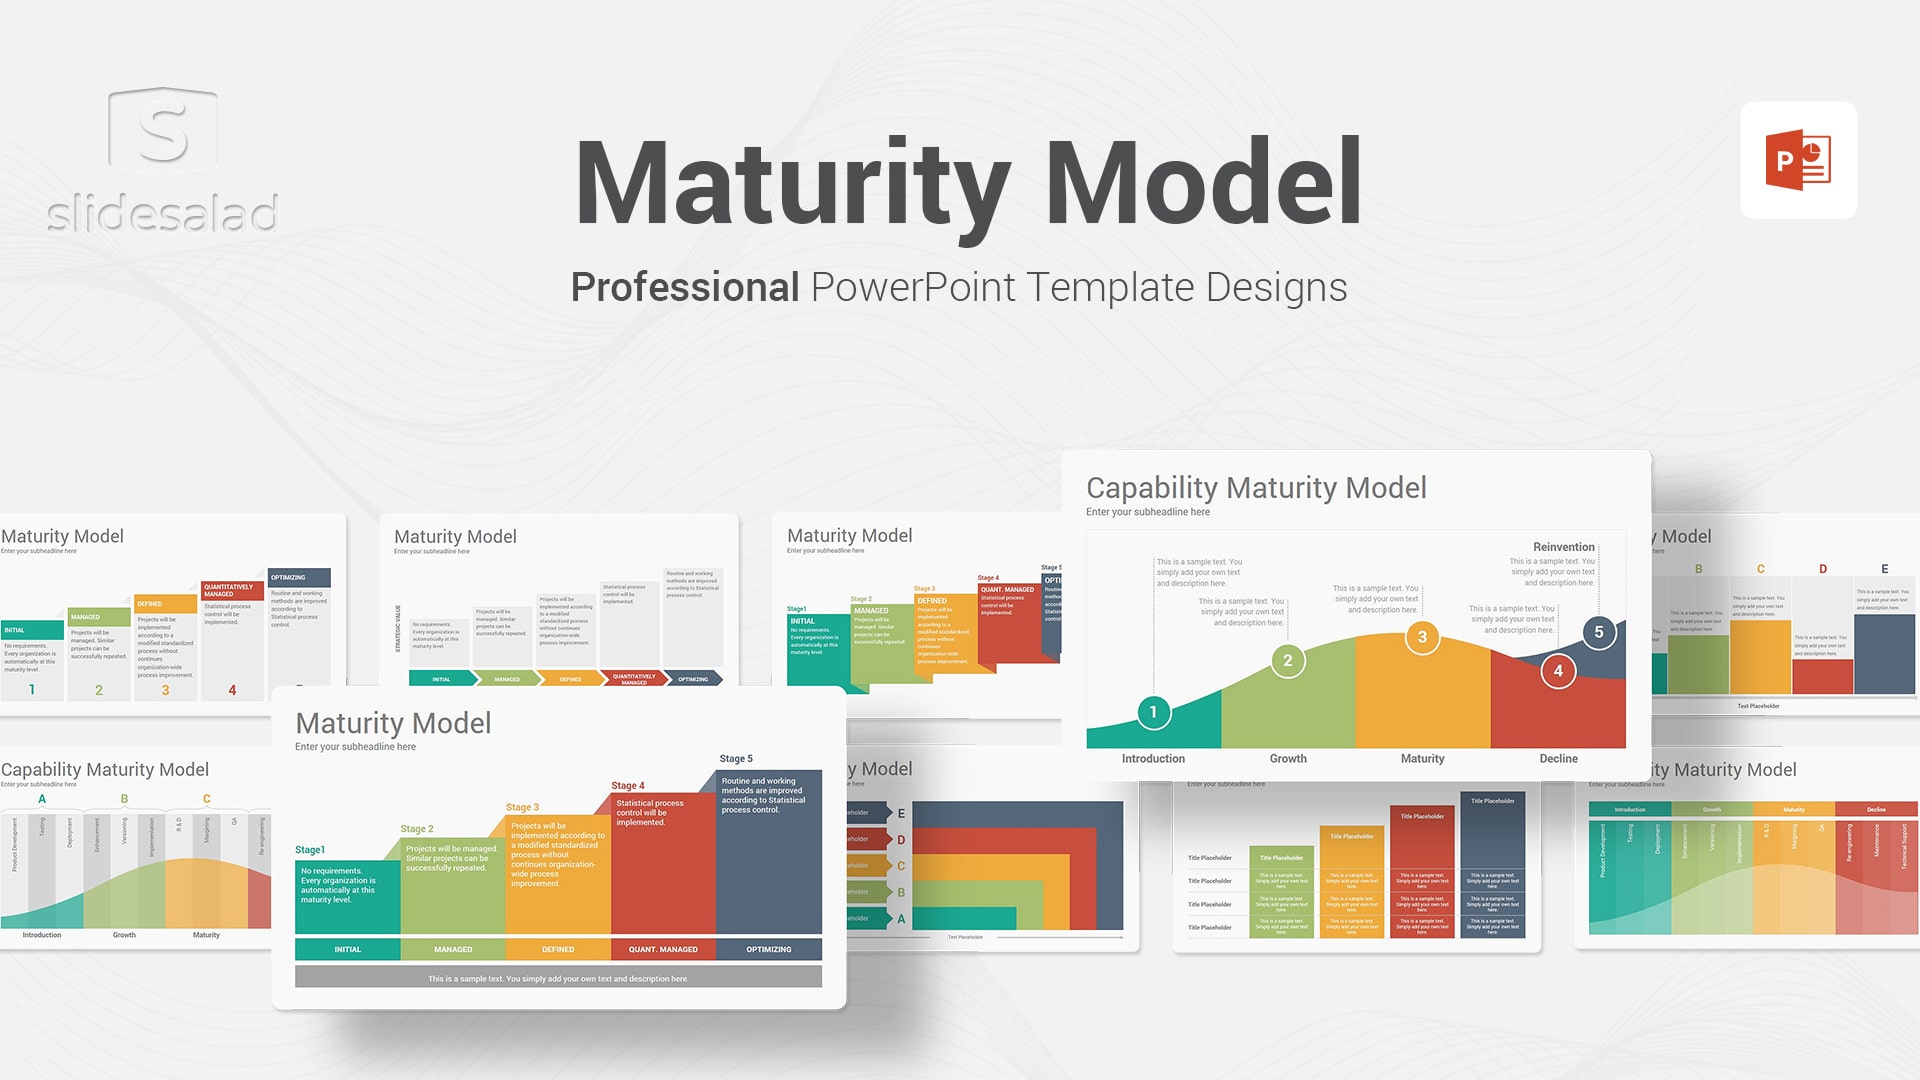 Business Maturity Model Diagrams PowerPoint Template Designs - Find Out How Your Business is Doing with This Helpful Maturity Model Diagram Infographic PPT Slide Layouts